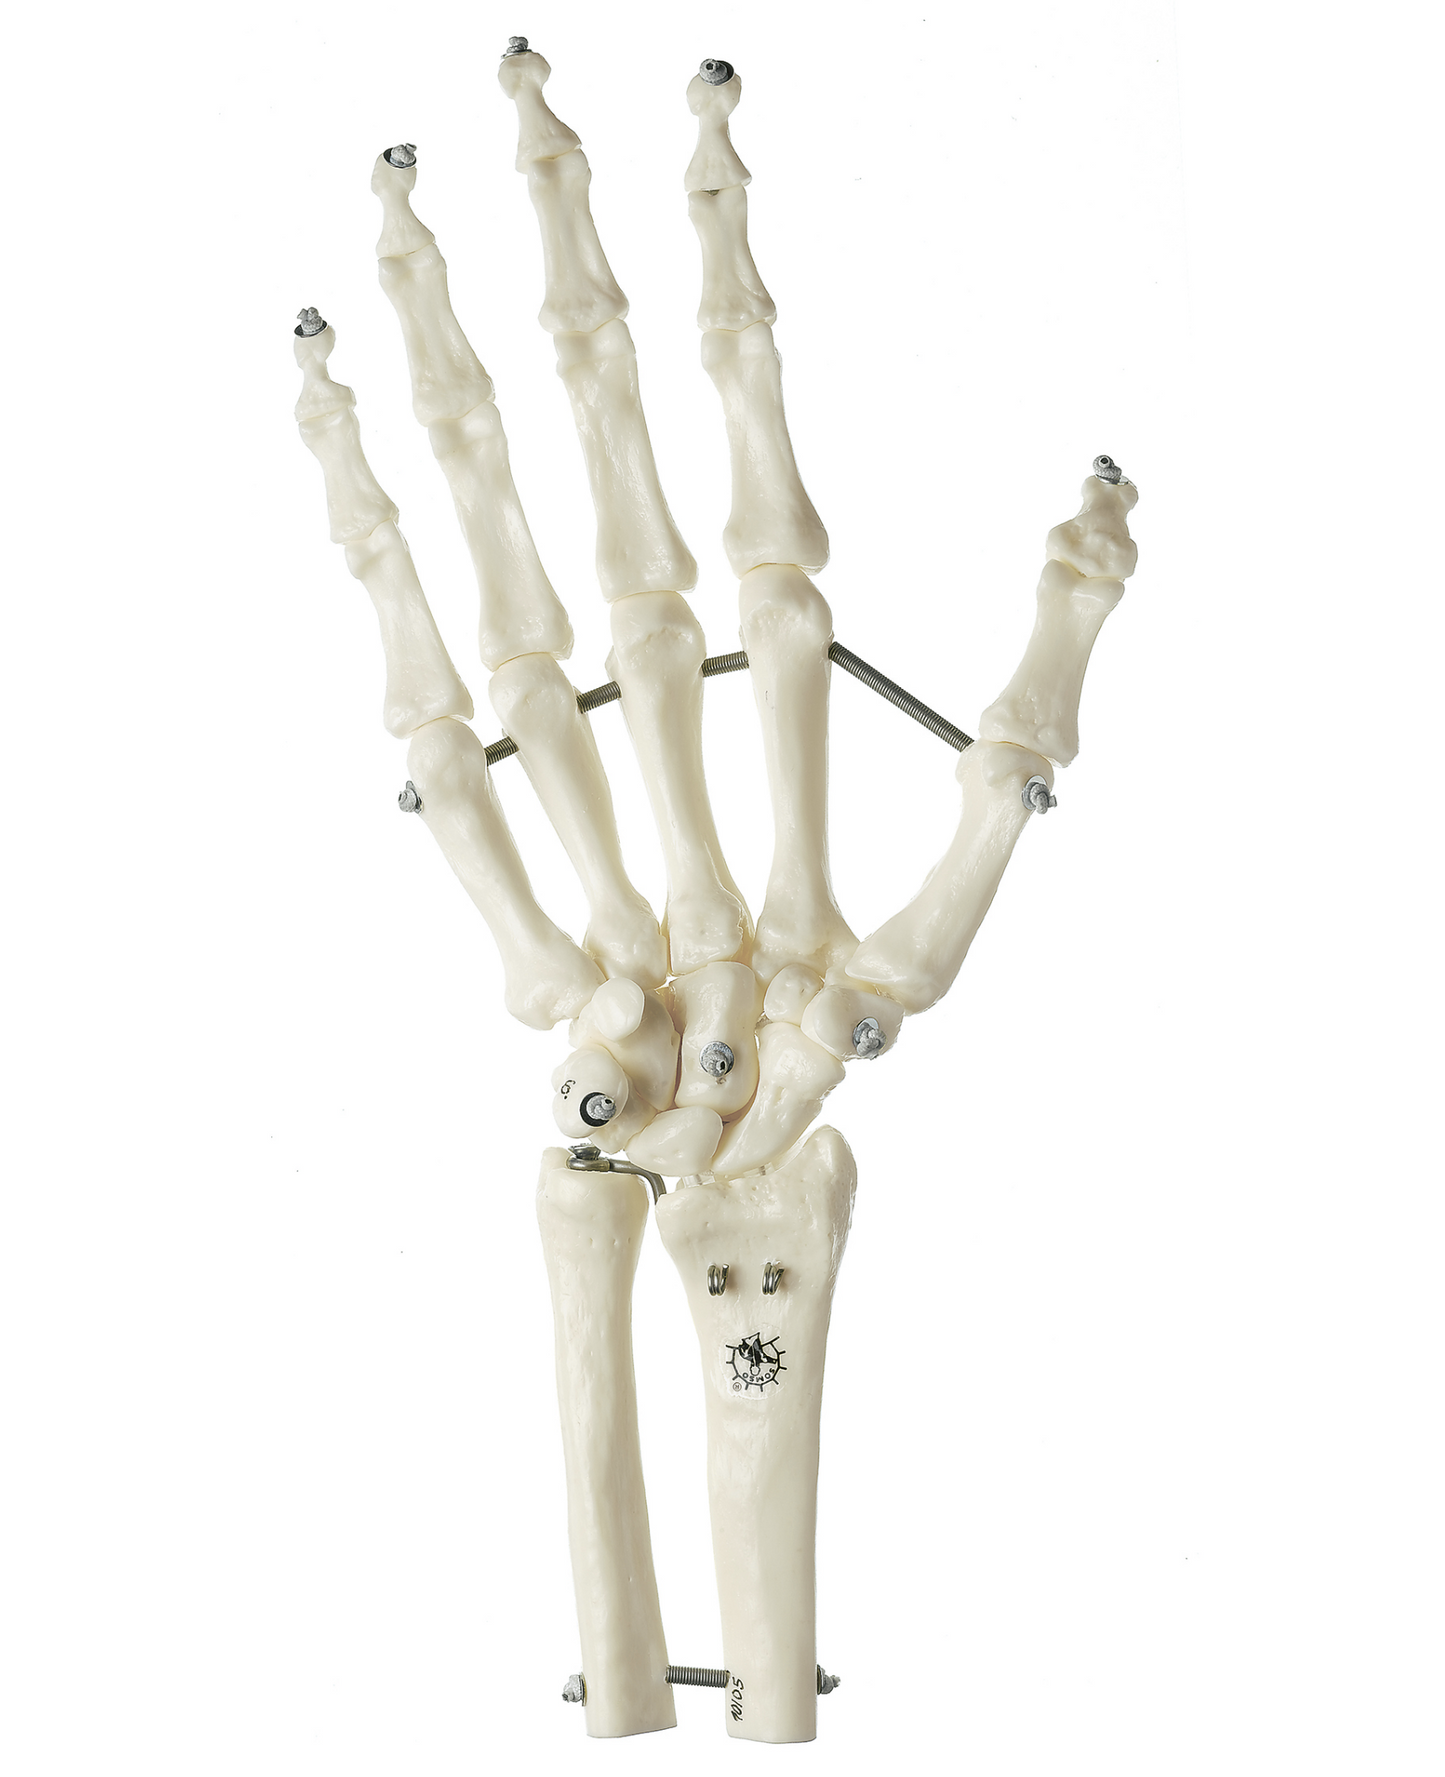 SOMSO skeleton model of hand with part of the forearm bones mounted on elastics